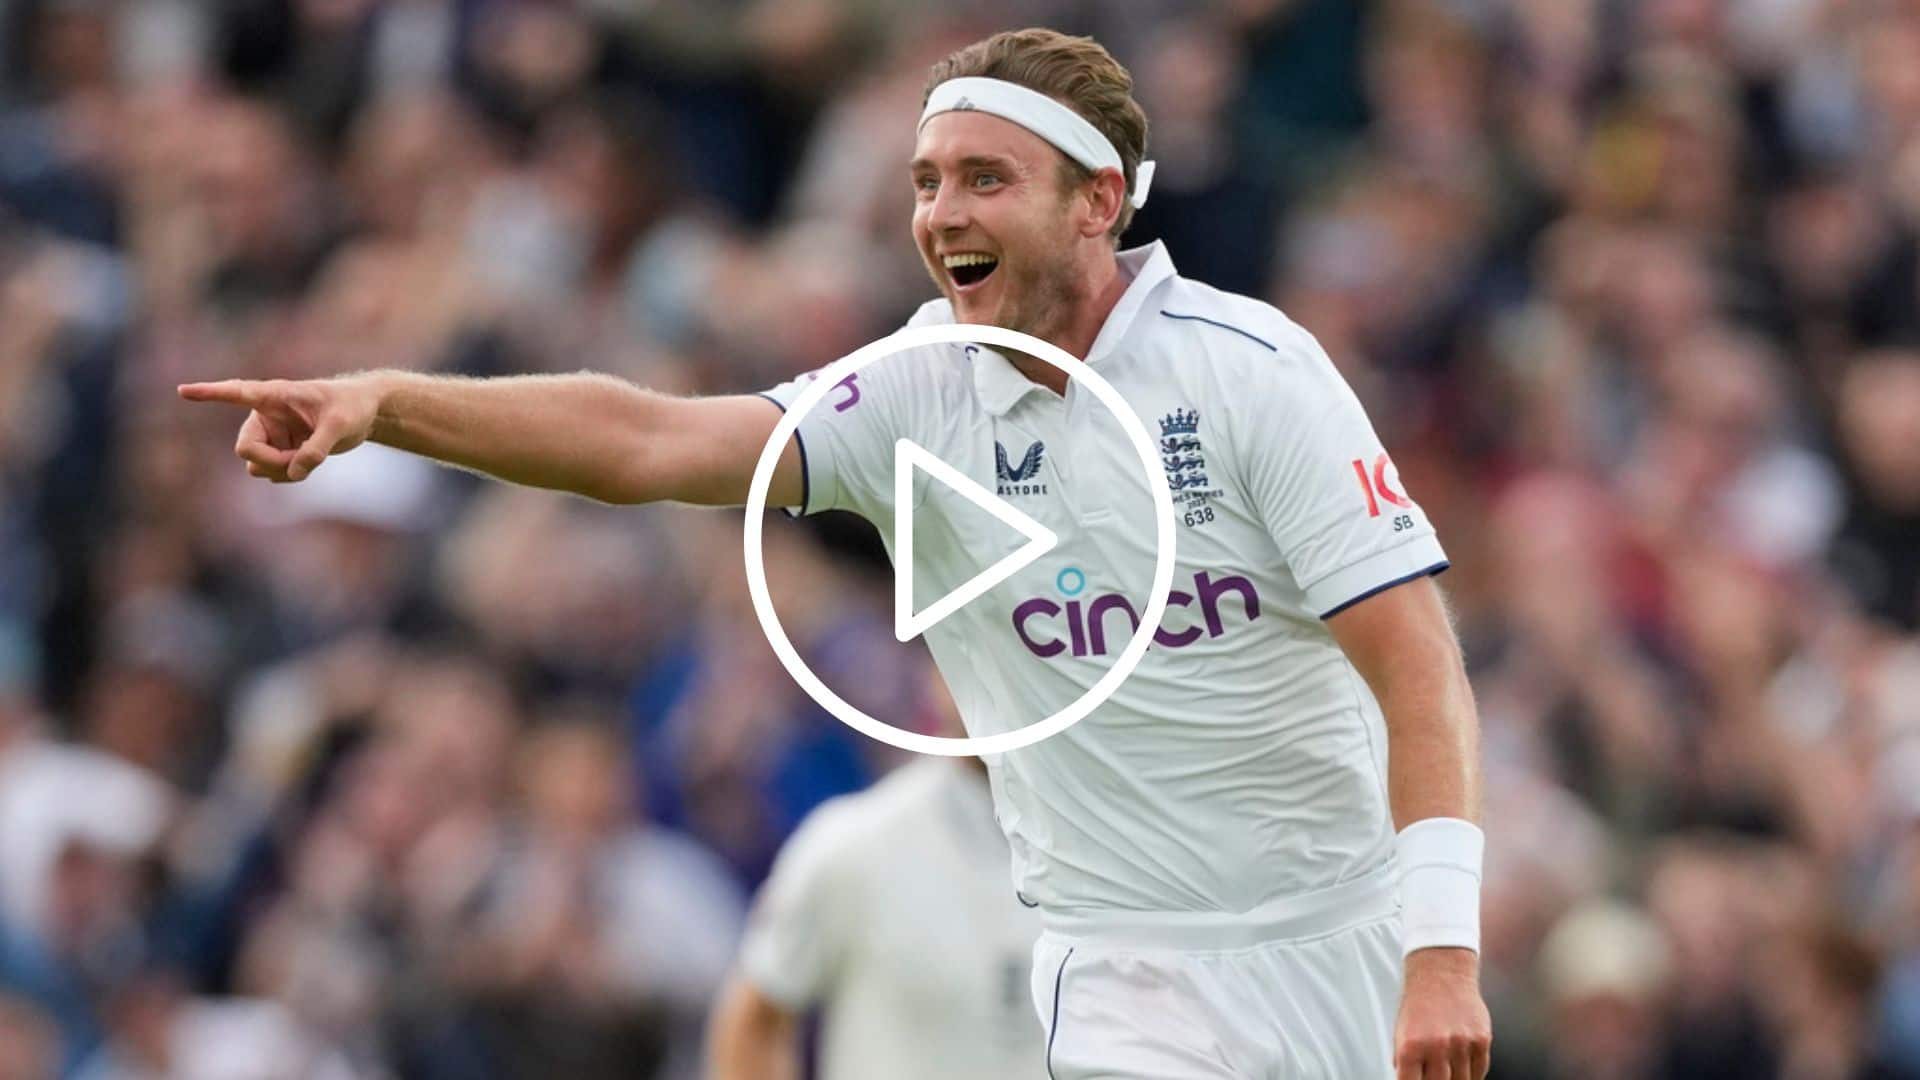 [Watch] Stuart Broad Seals England Win With A Wicket In His Final Delivery Of Test Cricket